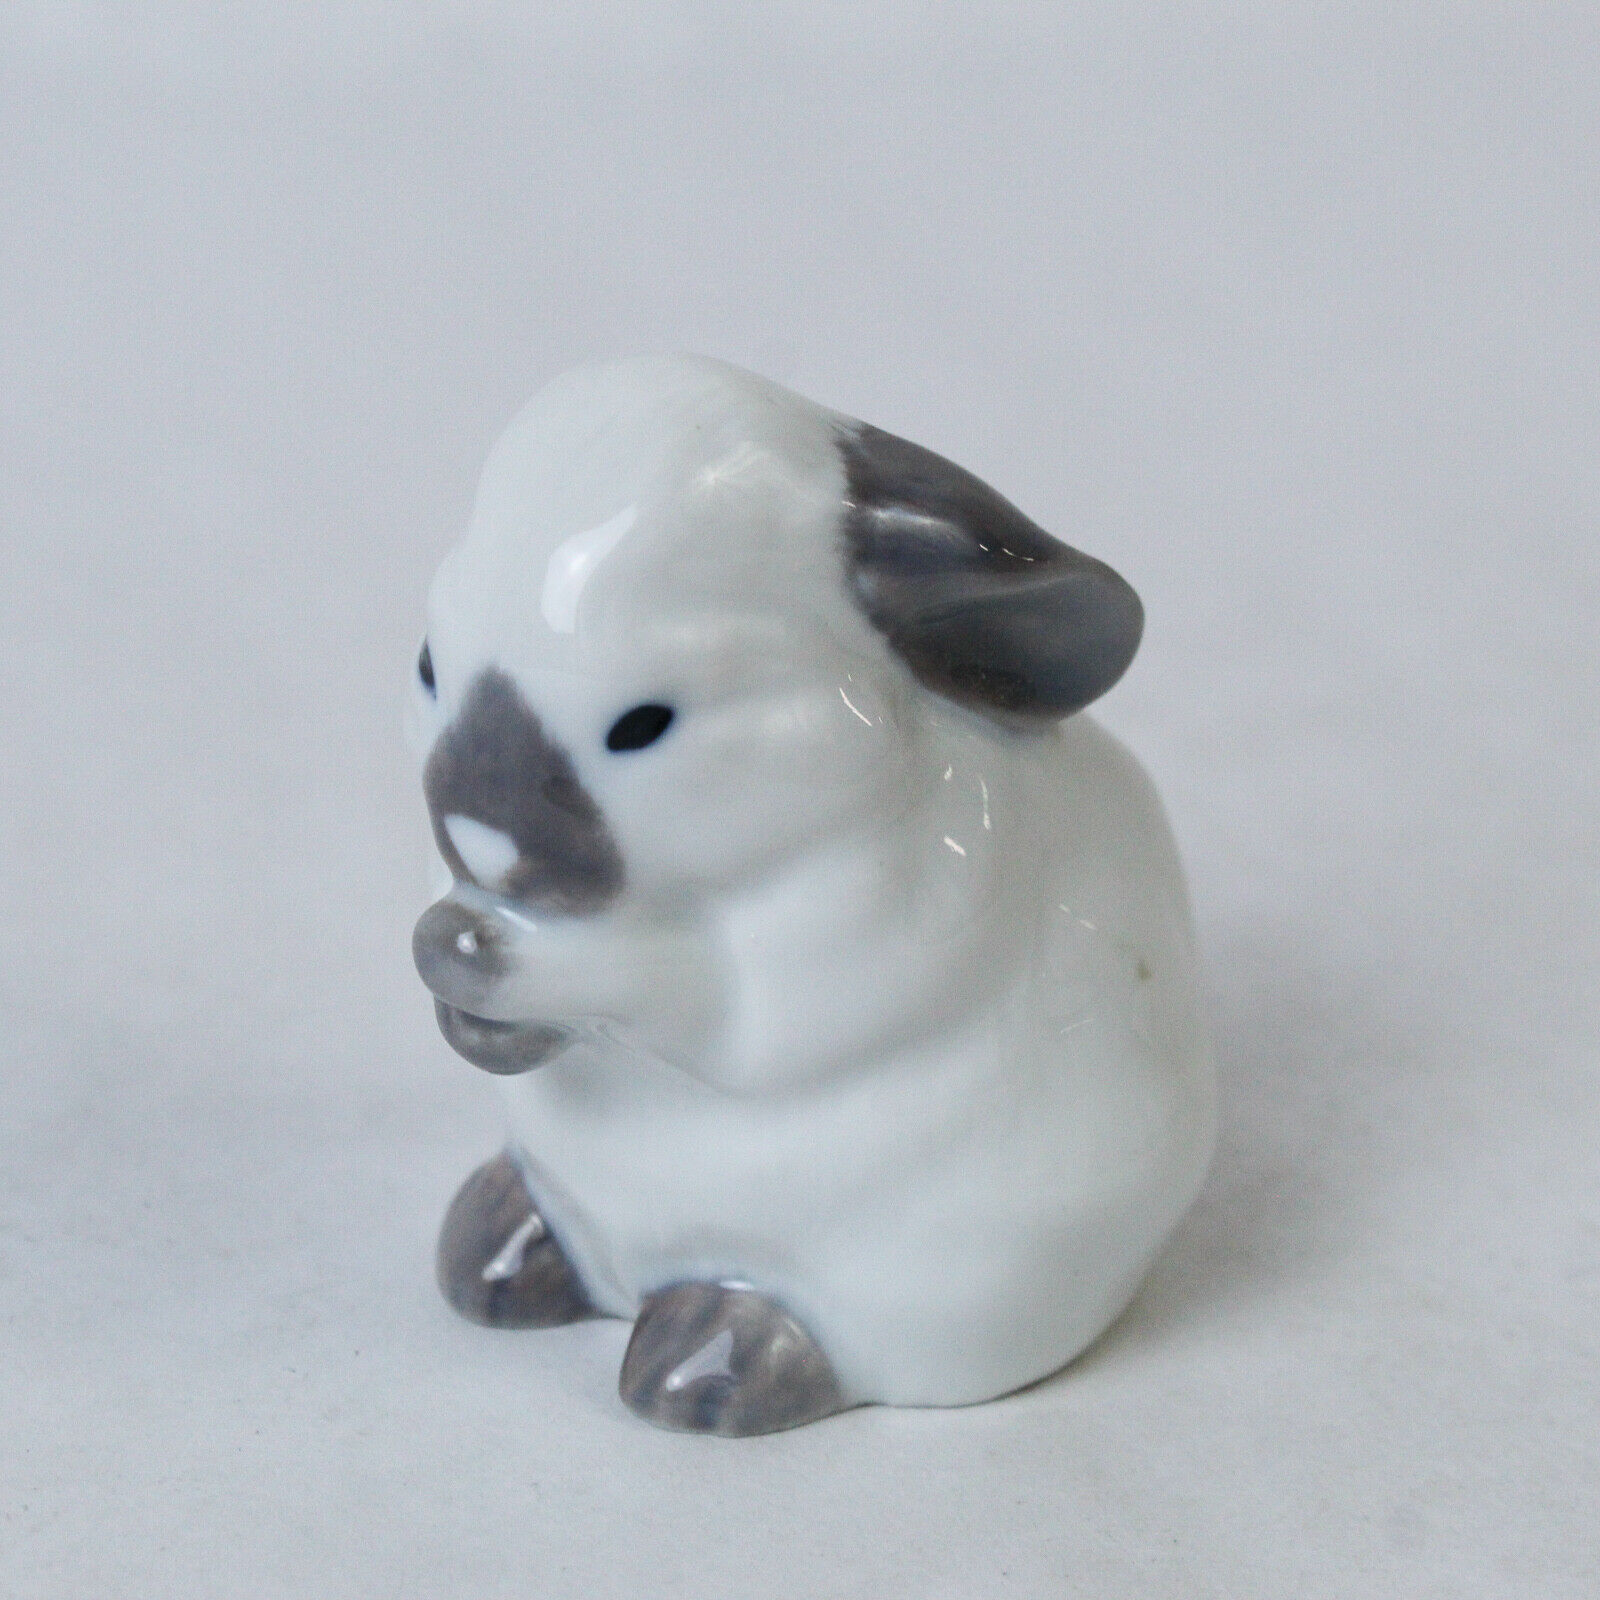 Bing and Grondahl Limited Edition Porcelain Rabbit Figurine 1999